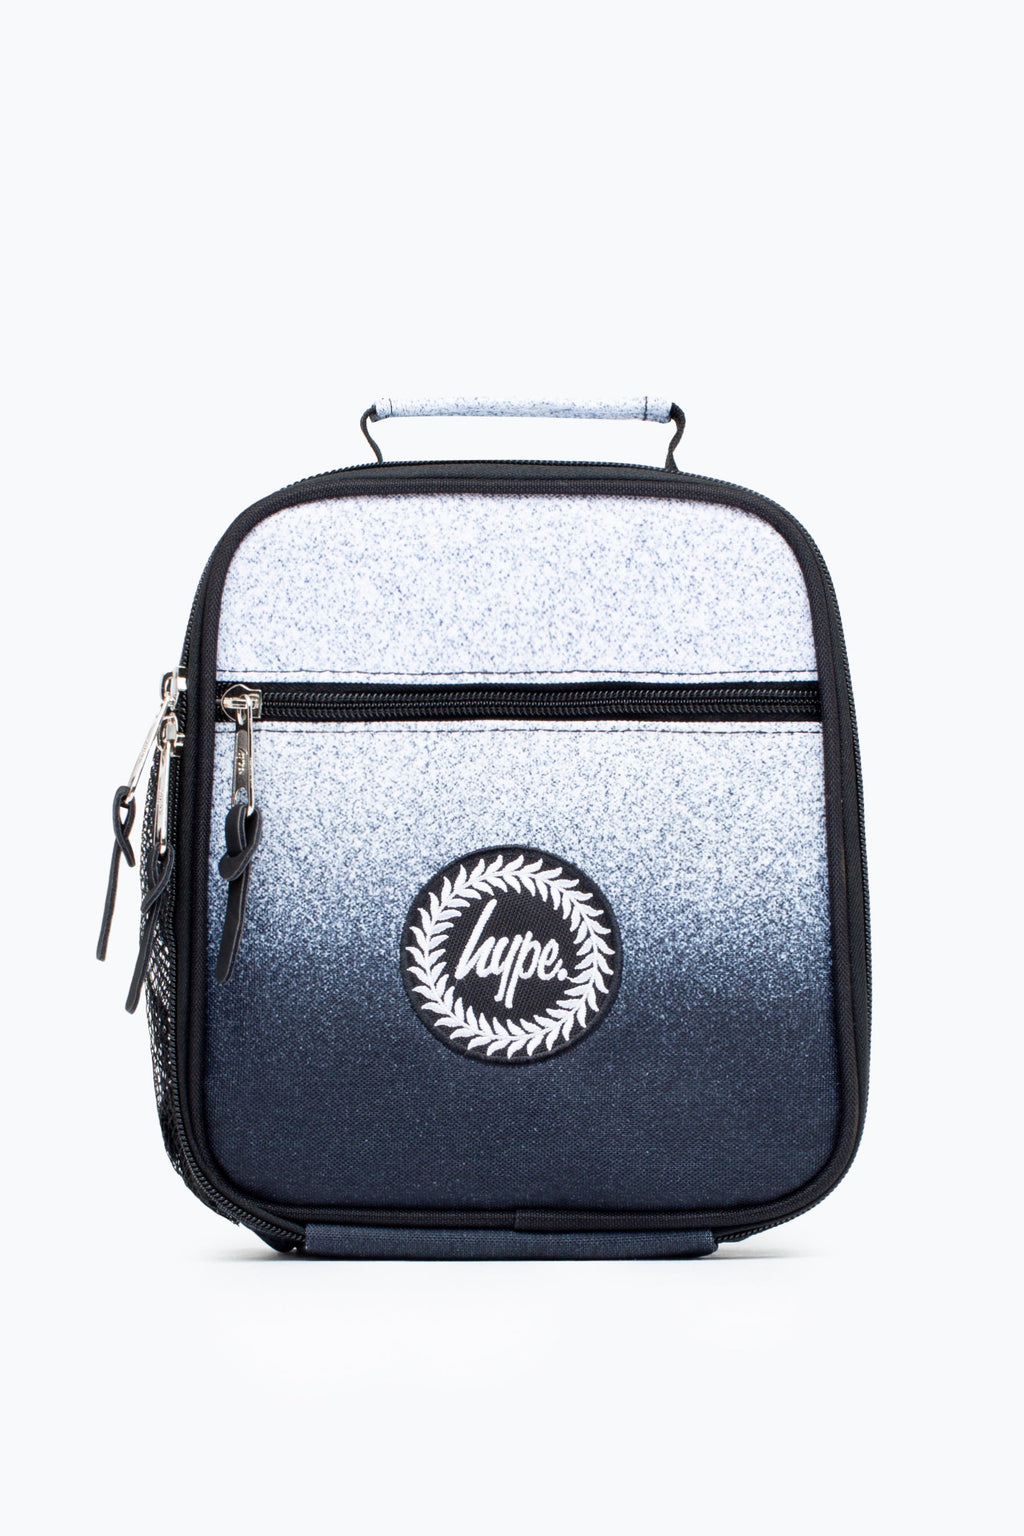 Hype Speckle Fade Lunch Box